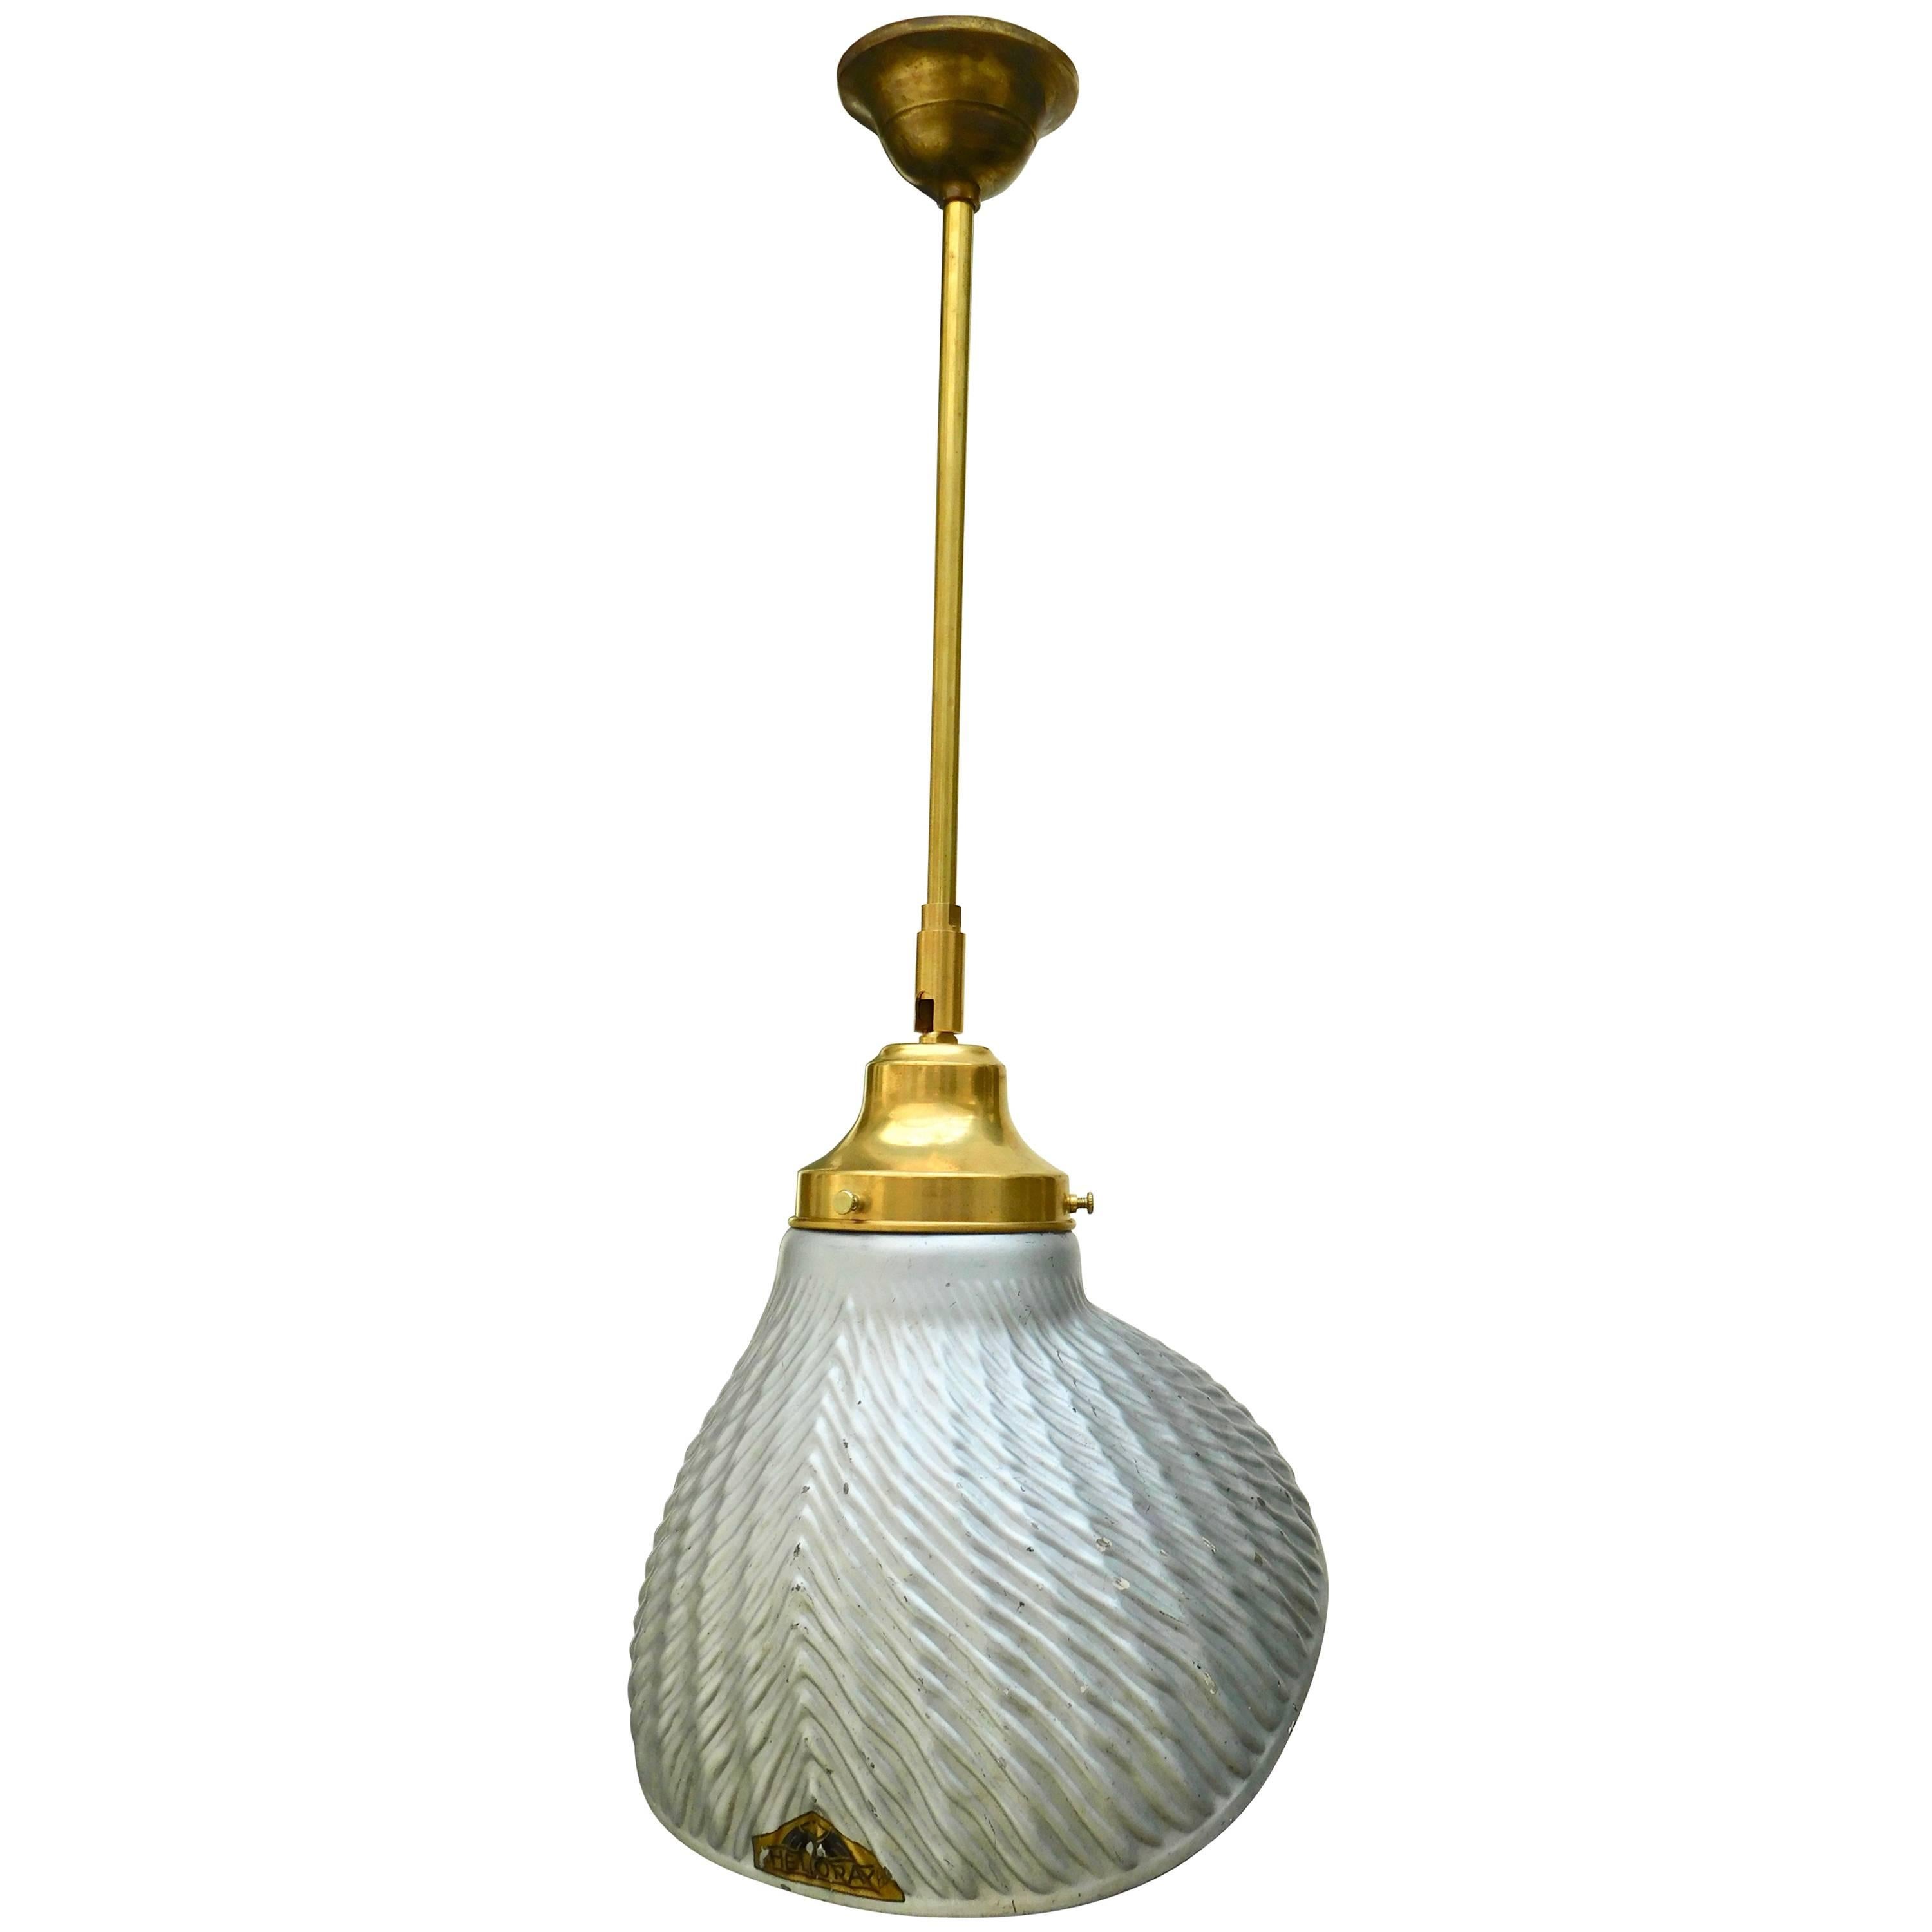 Helioray Hanging Mercury Glass Doctors Lamp For Sale